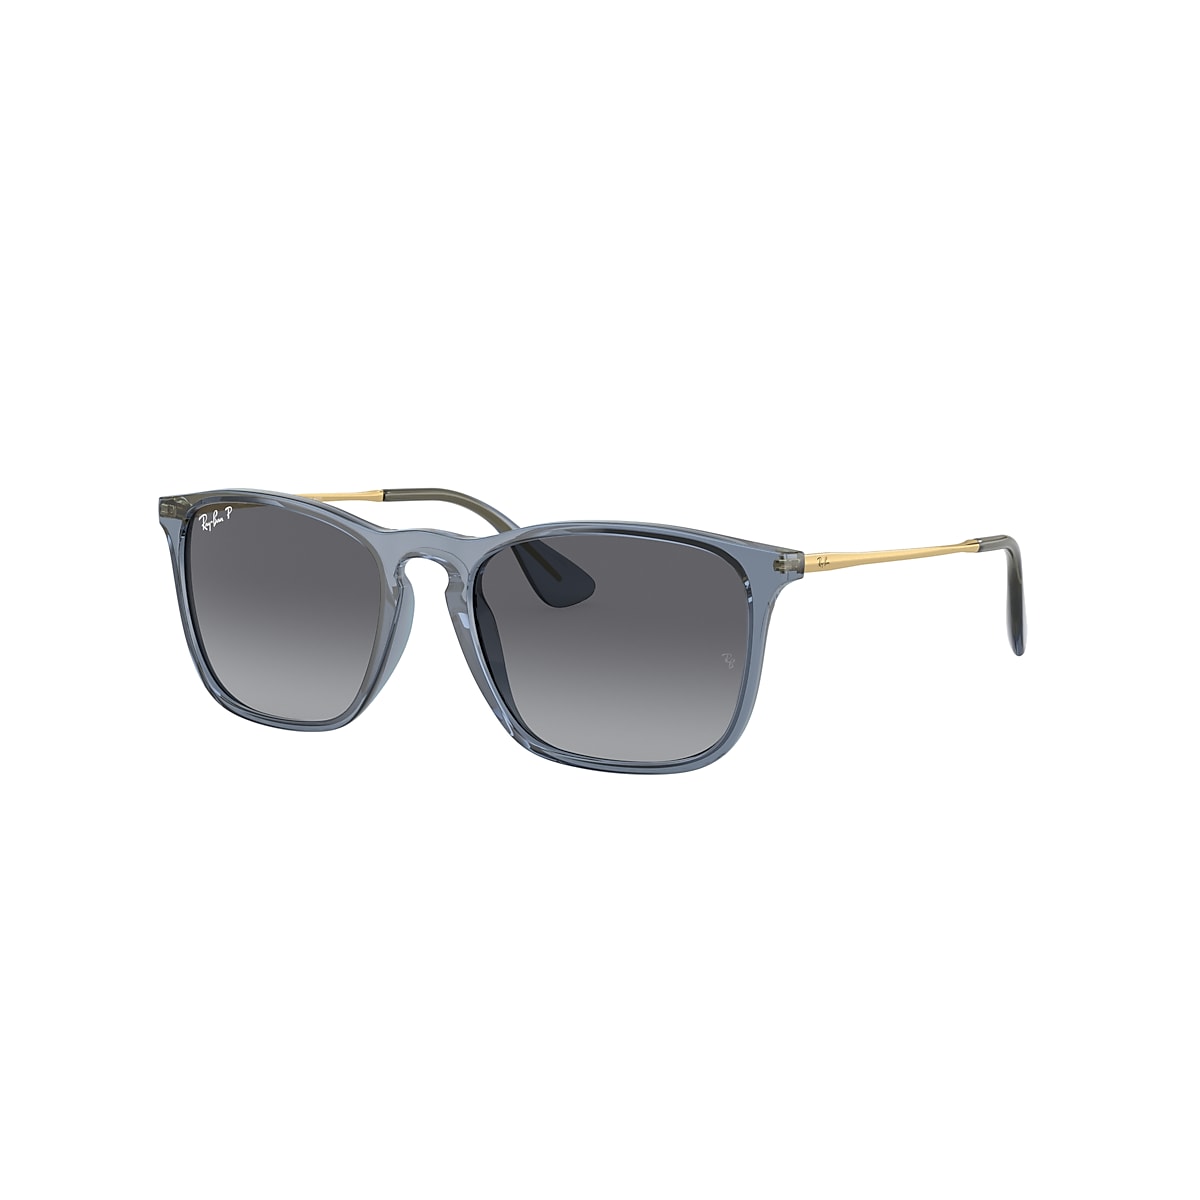 CHRIS Sunglasses in Transparent Blue and Grey - Ray-Ban